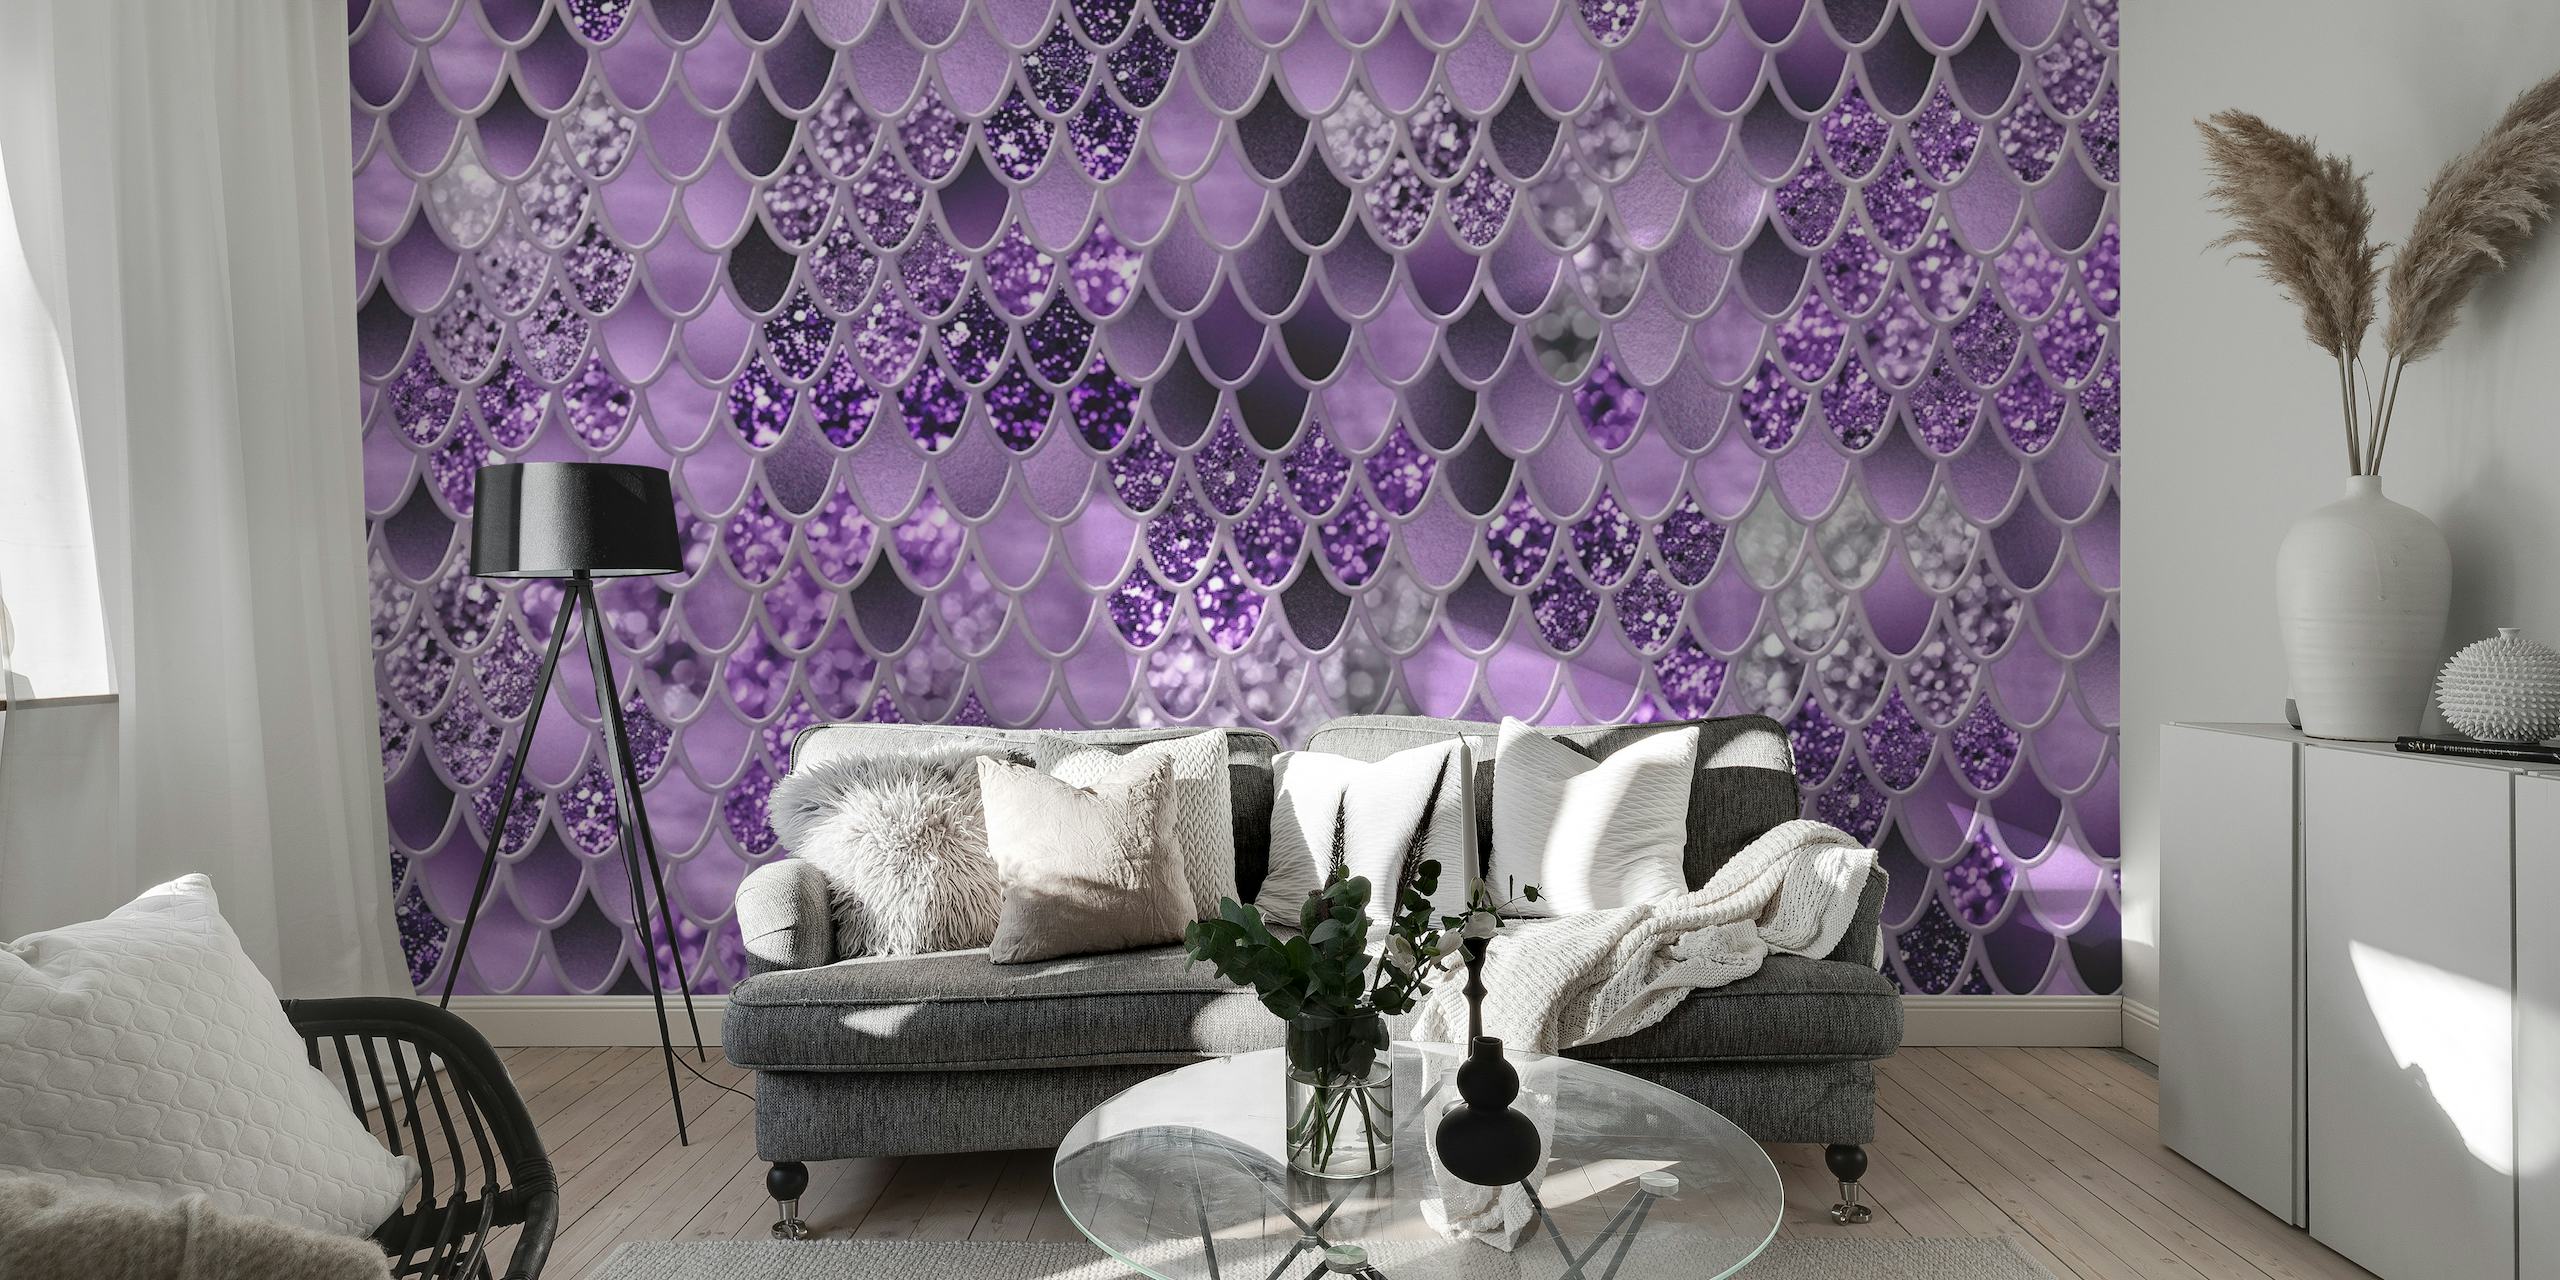 Purple mermaid scale pattern for wall mural with sparkling detail.